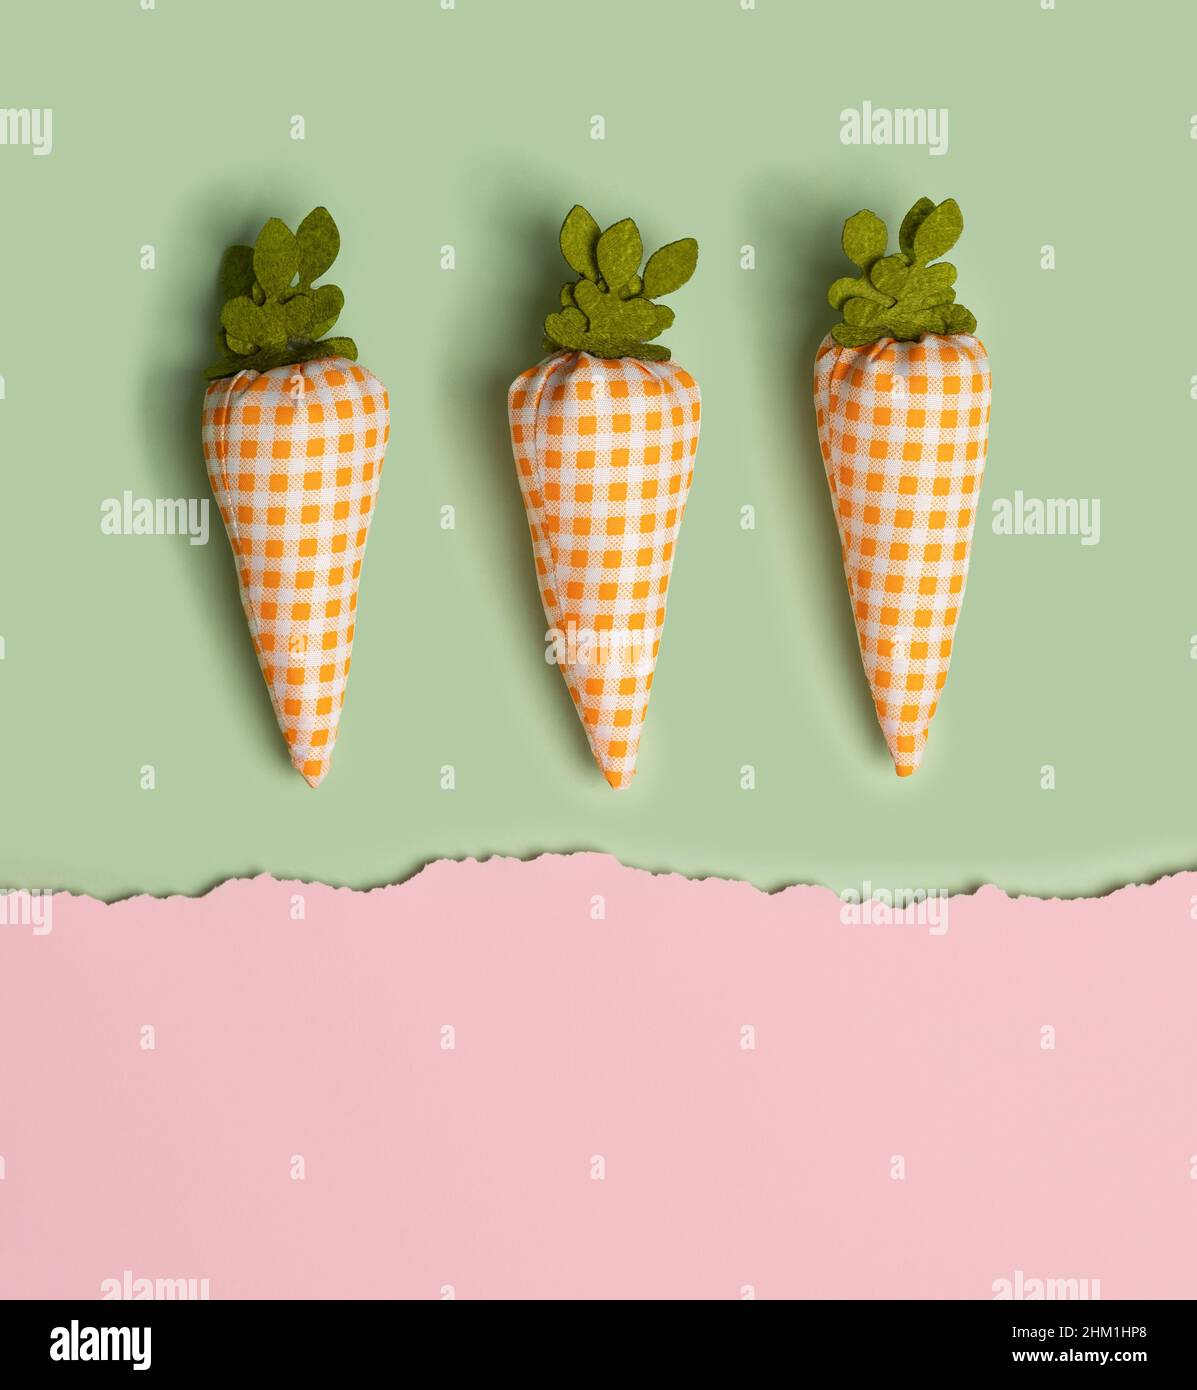 Decoration carrots on a two tone pink and green background. Easter, spring colorful backdrop. Stock Photo